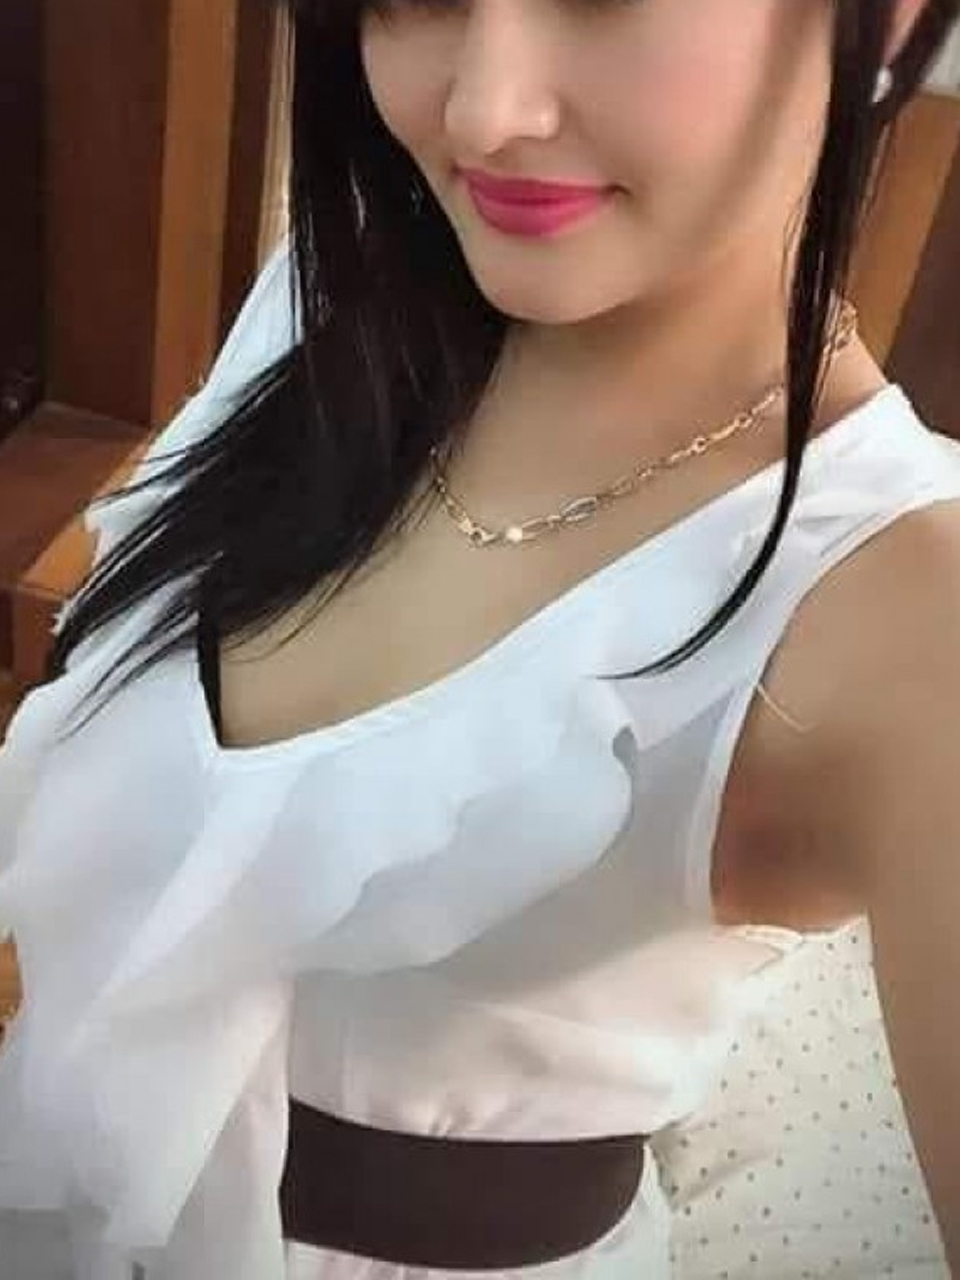 Call Girls Number in Bangalore